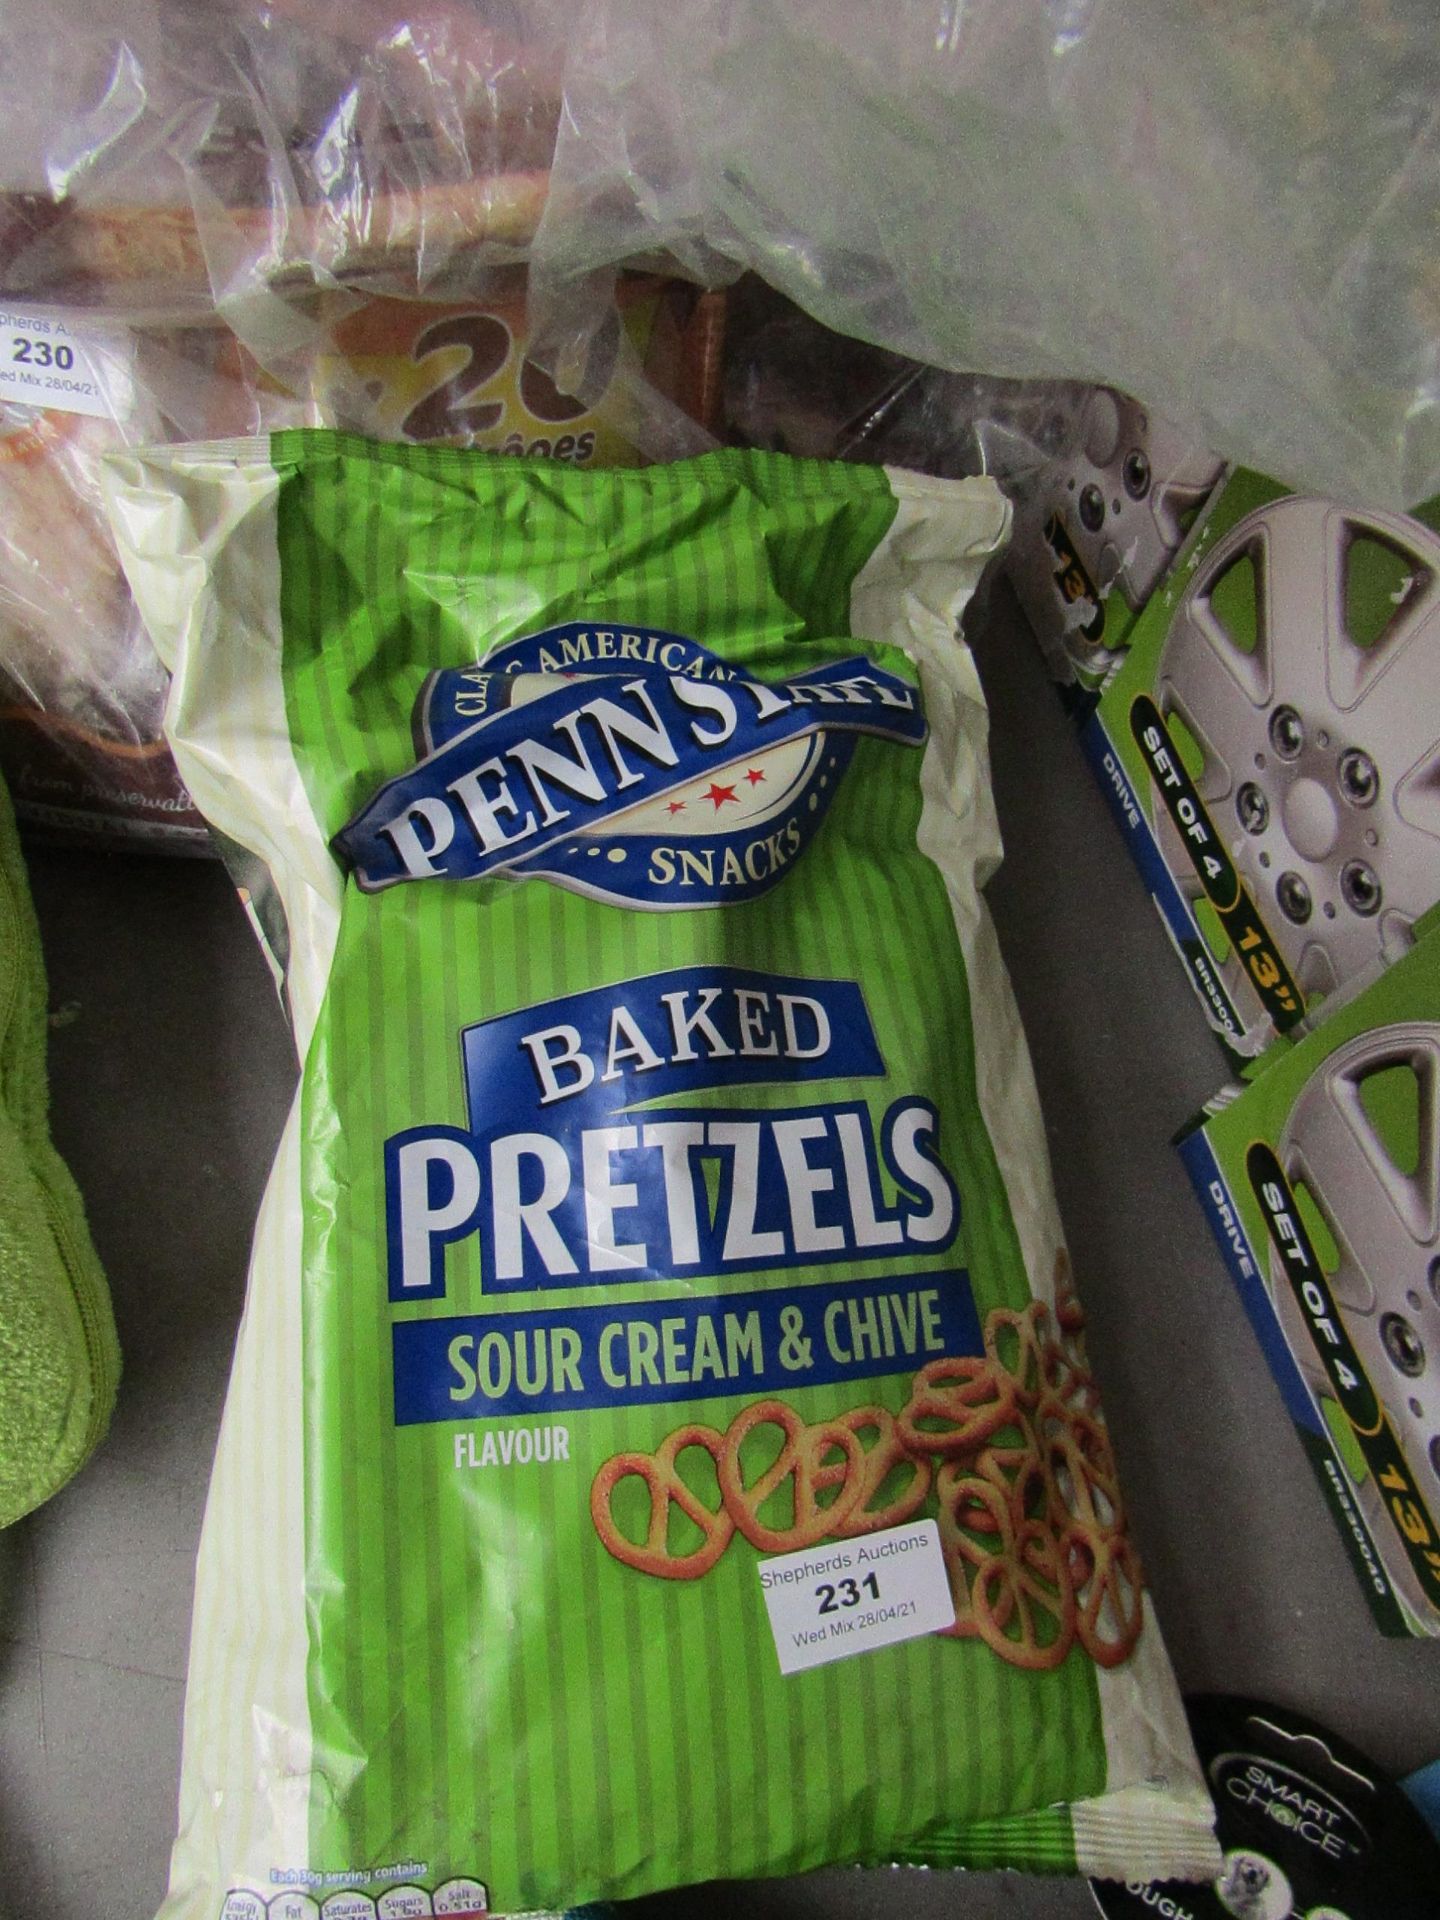 Pennstate - Baked Sour Cream & Chive Pretzels - BBD 09/21. - Unused & Packaged.